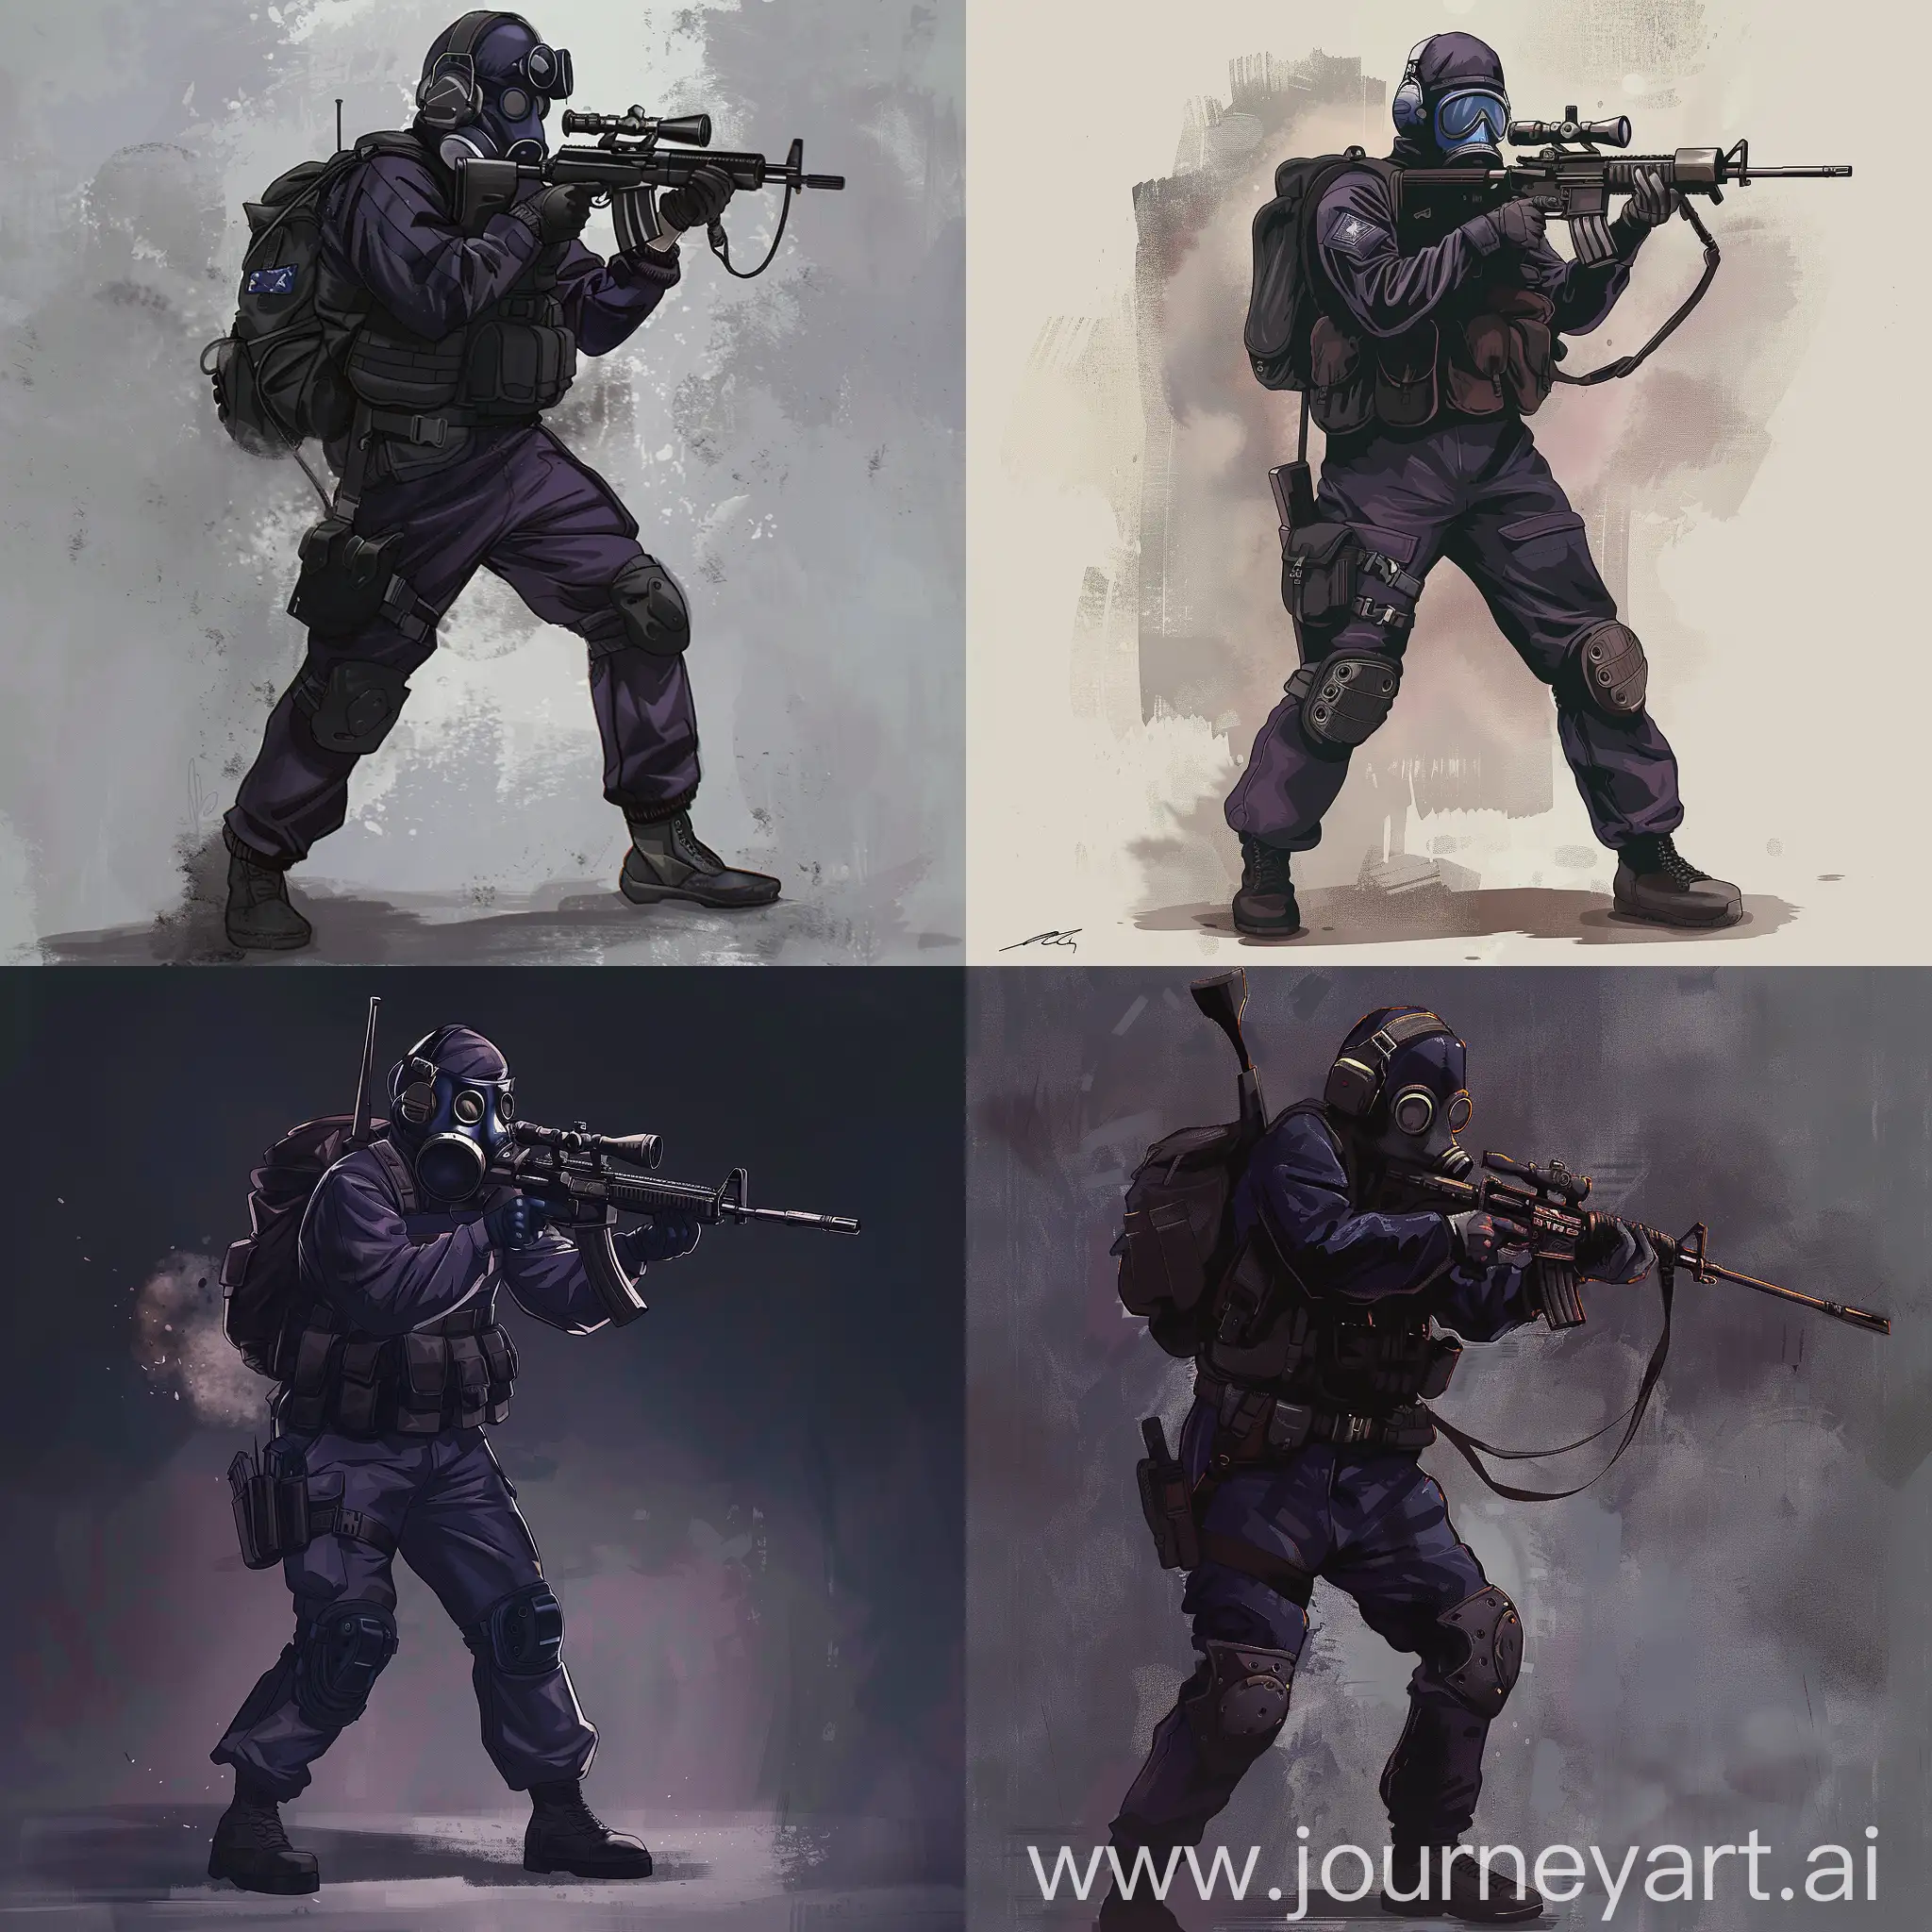 Digital, Concept art, dark purple military jumpsuit, gasmask on his face, small military backpack, military unloading on his body, sniper rifle in his hands.